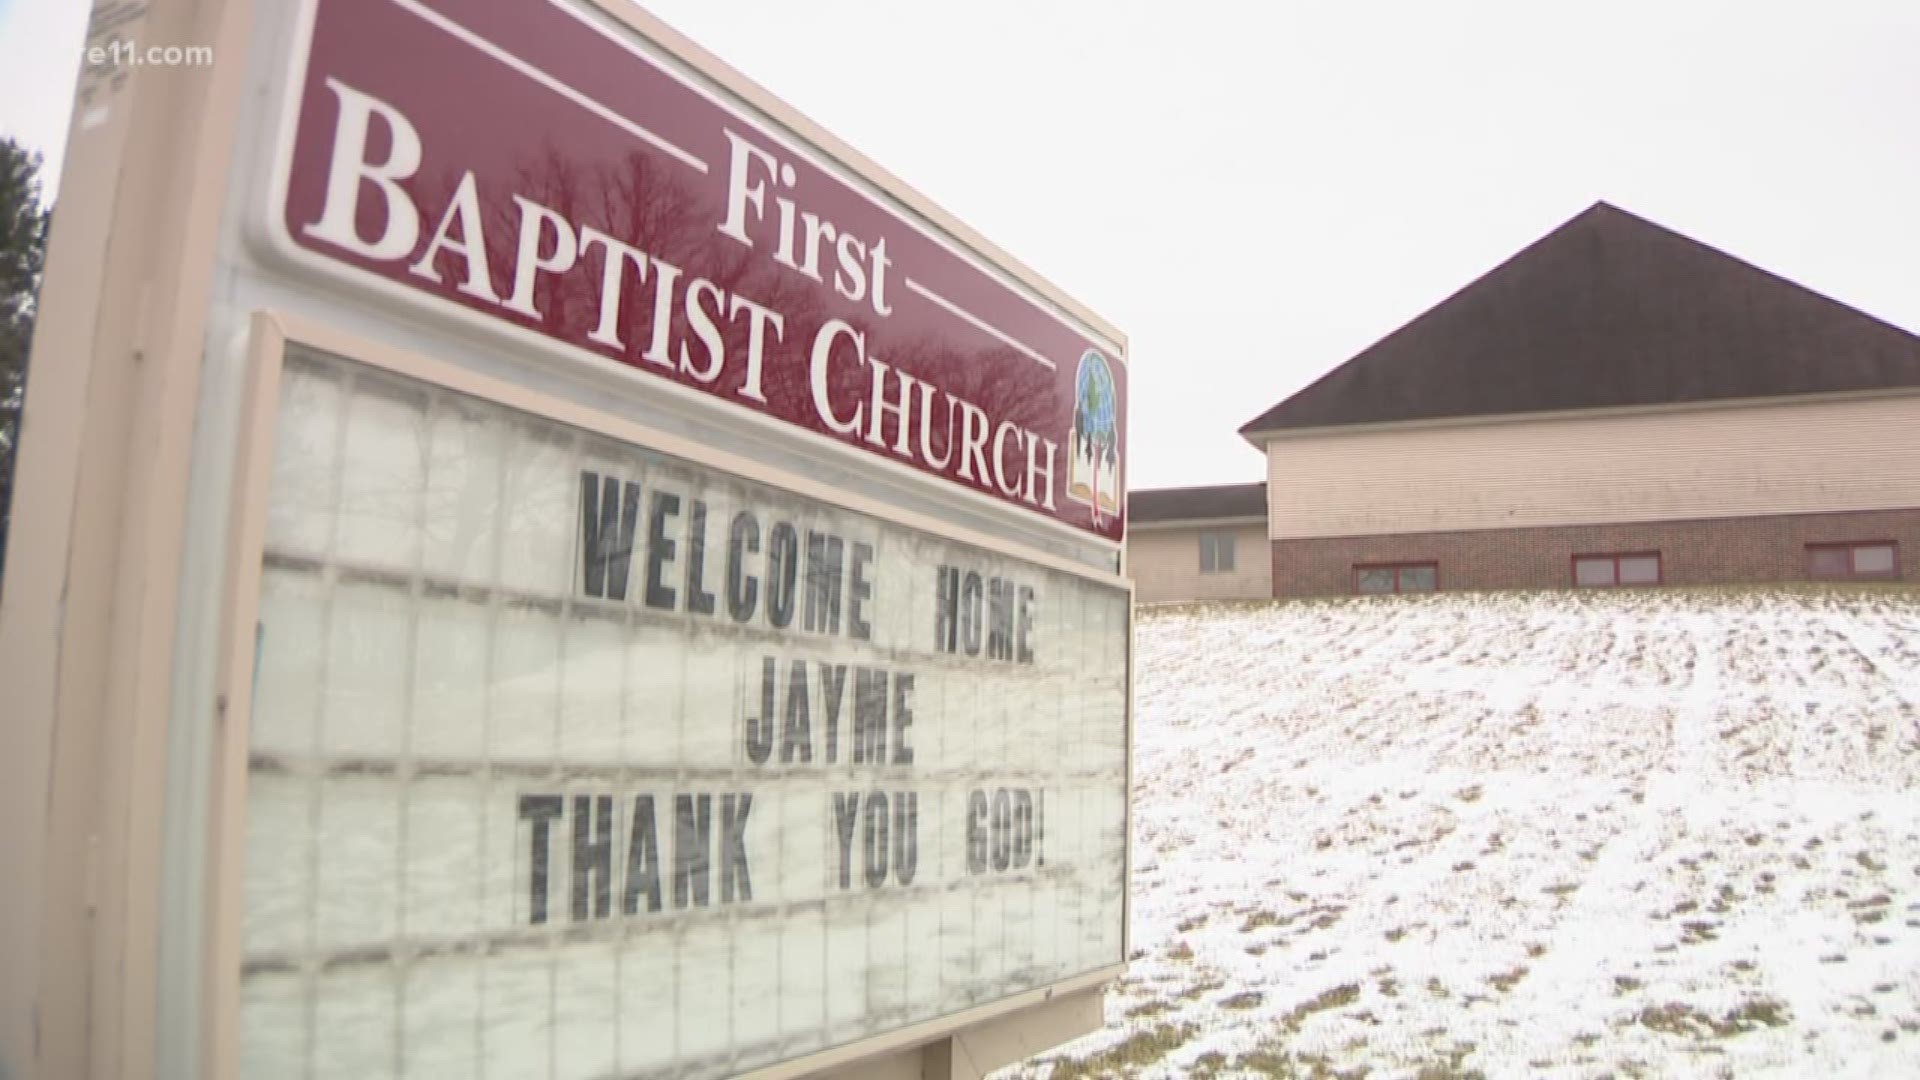 This morning, at churches in and around Jayme's hometown - people gathered to pray for Jayme and to celebrate her return home.